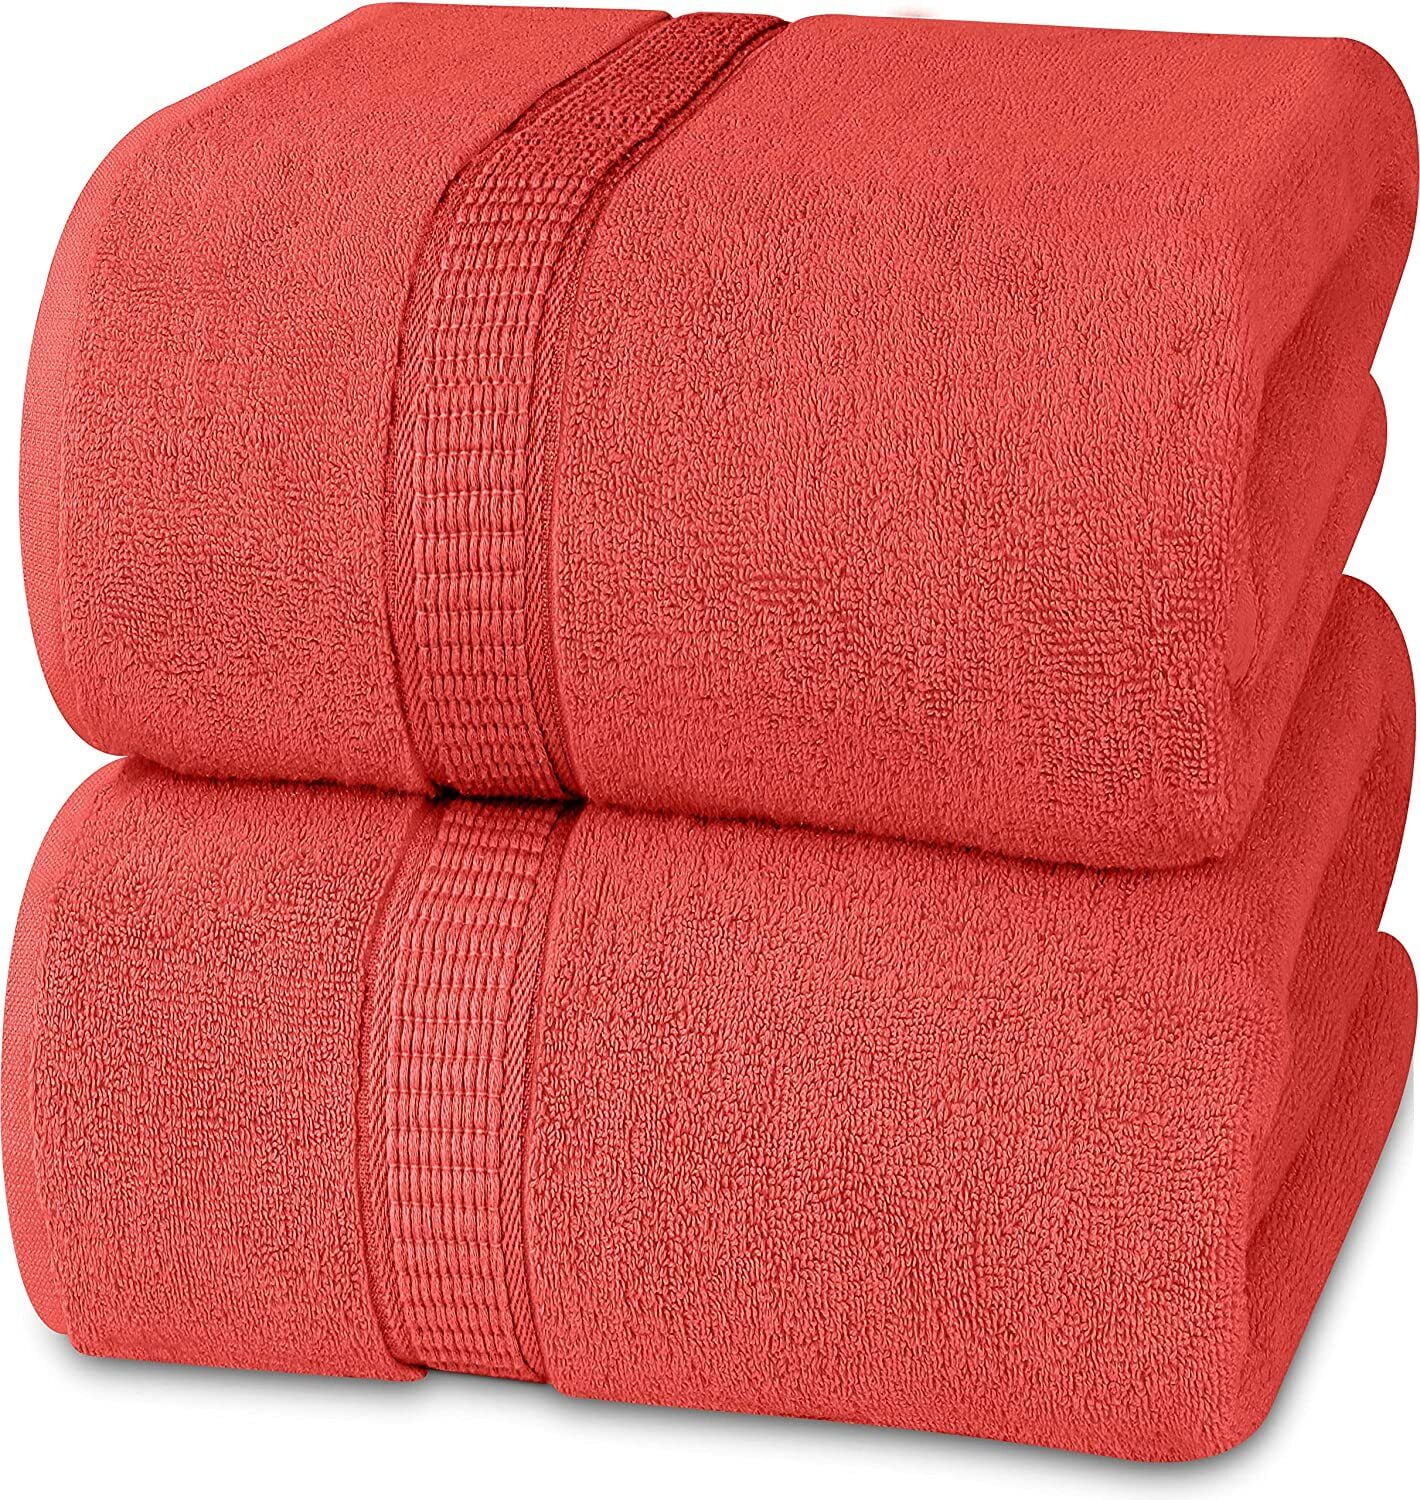 SEISSO Luxury Bath Towels for Bathroom Extra Large Bath Sheets , 2 Pack 63x  35 inches Super Soft Viscose Made from Bamboo Jumbo Bath Towels for Sports,  Hotel, Spa, Beach, Yoga, College